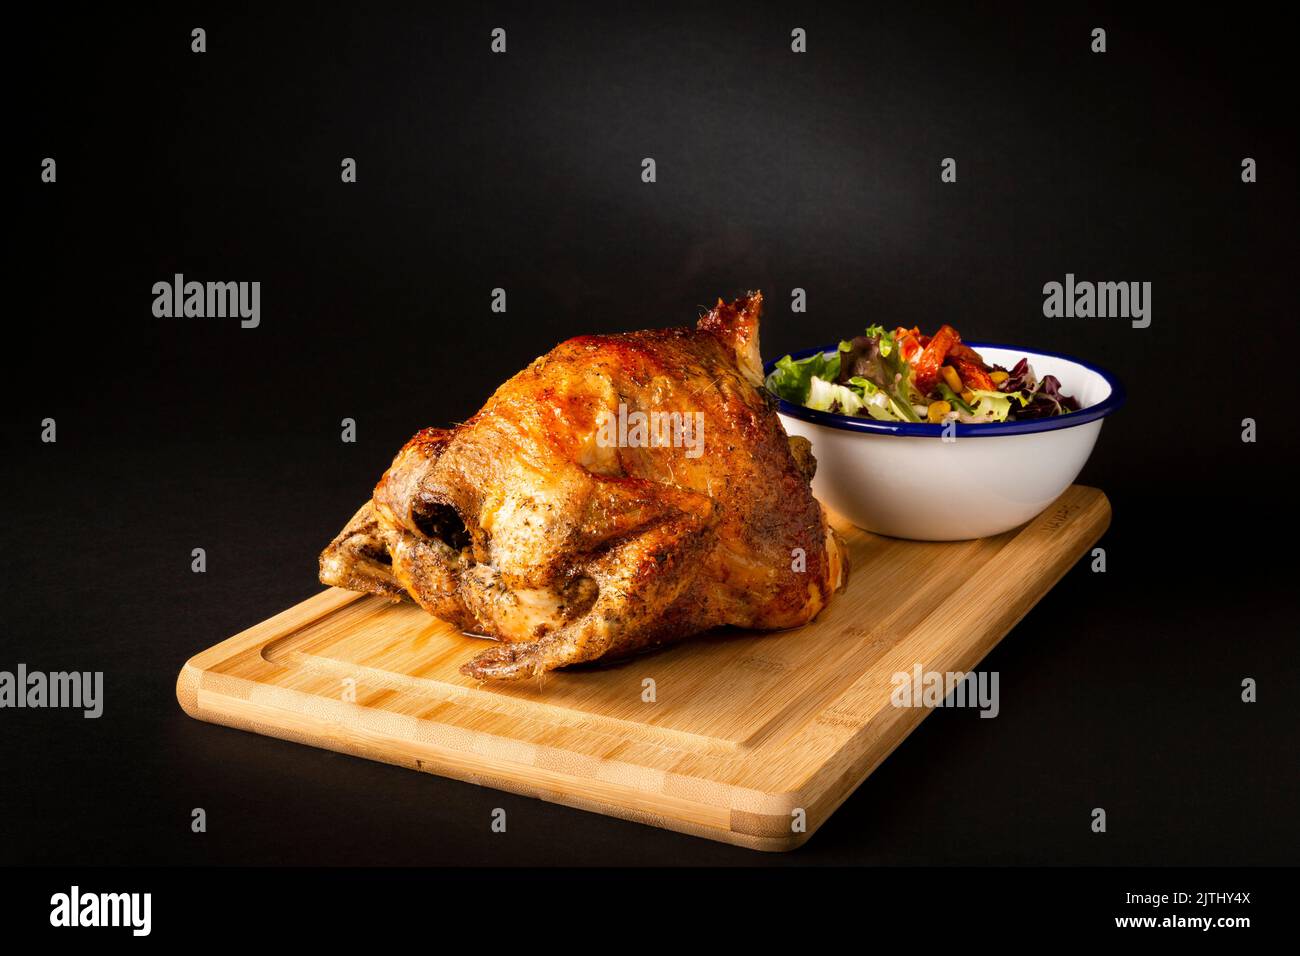 Roasted chicken on a wooden table accompanied with a green salad over a black background Stock Photo